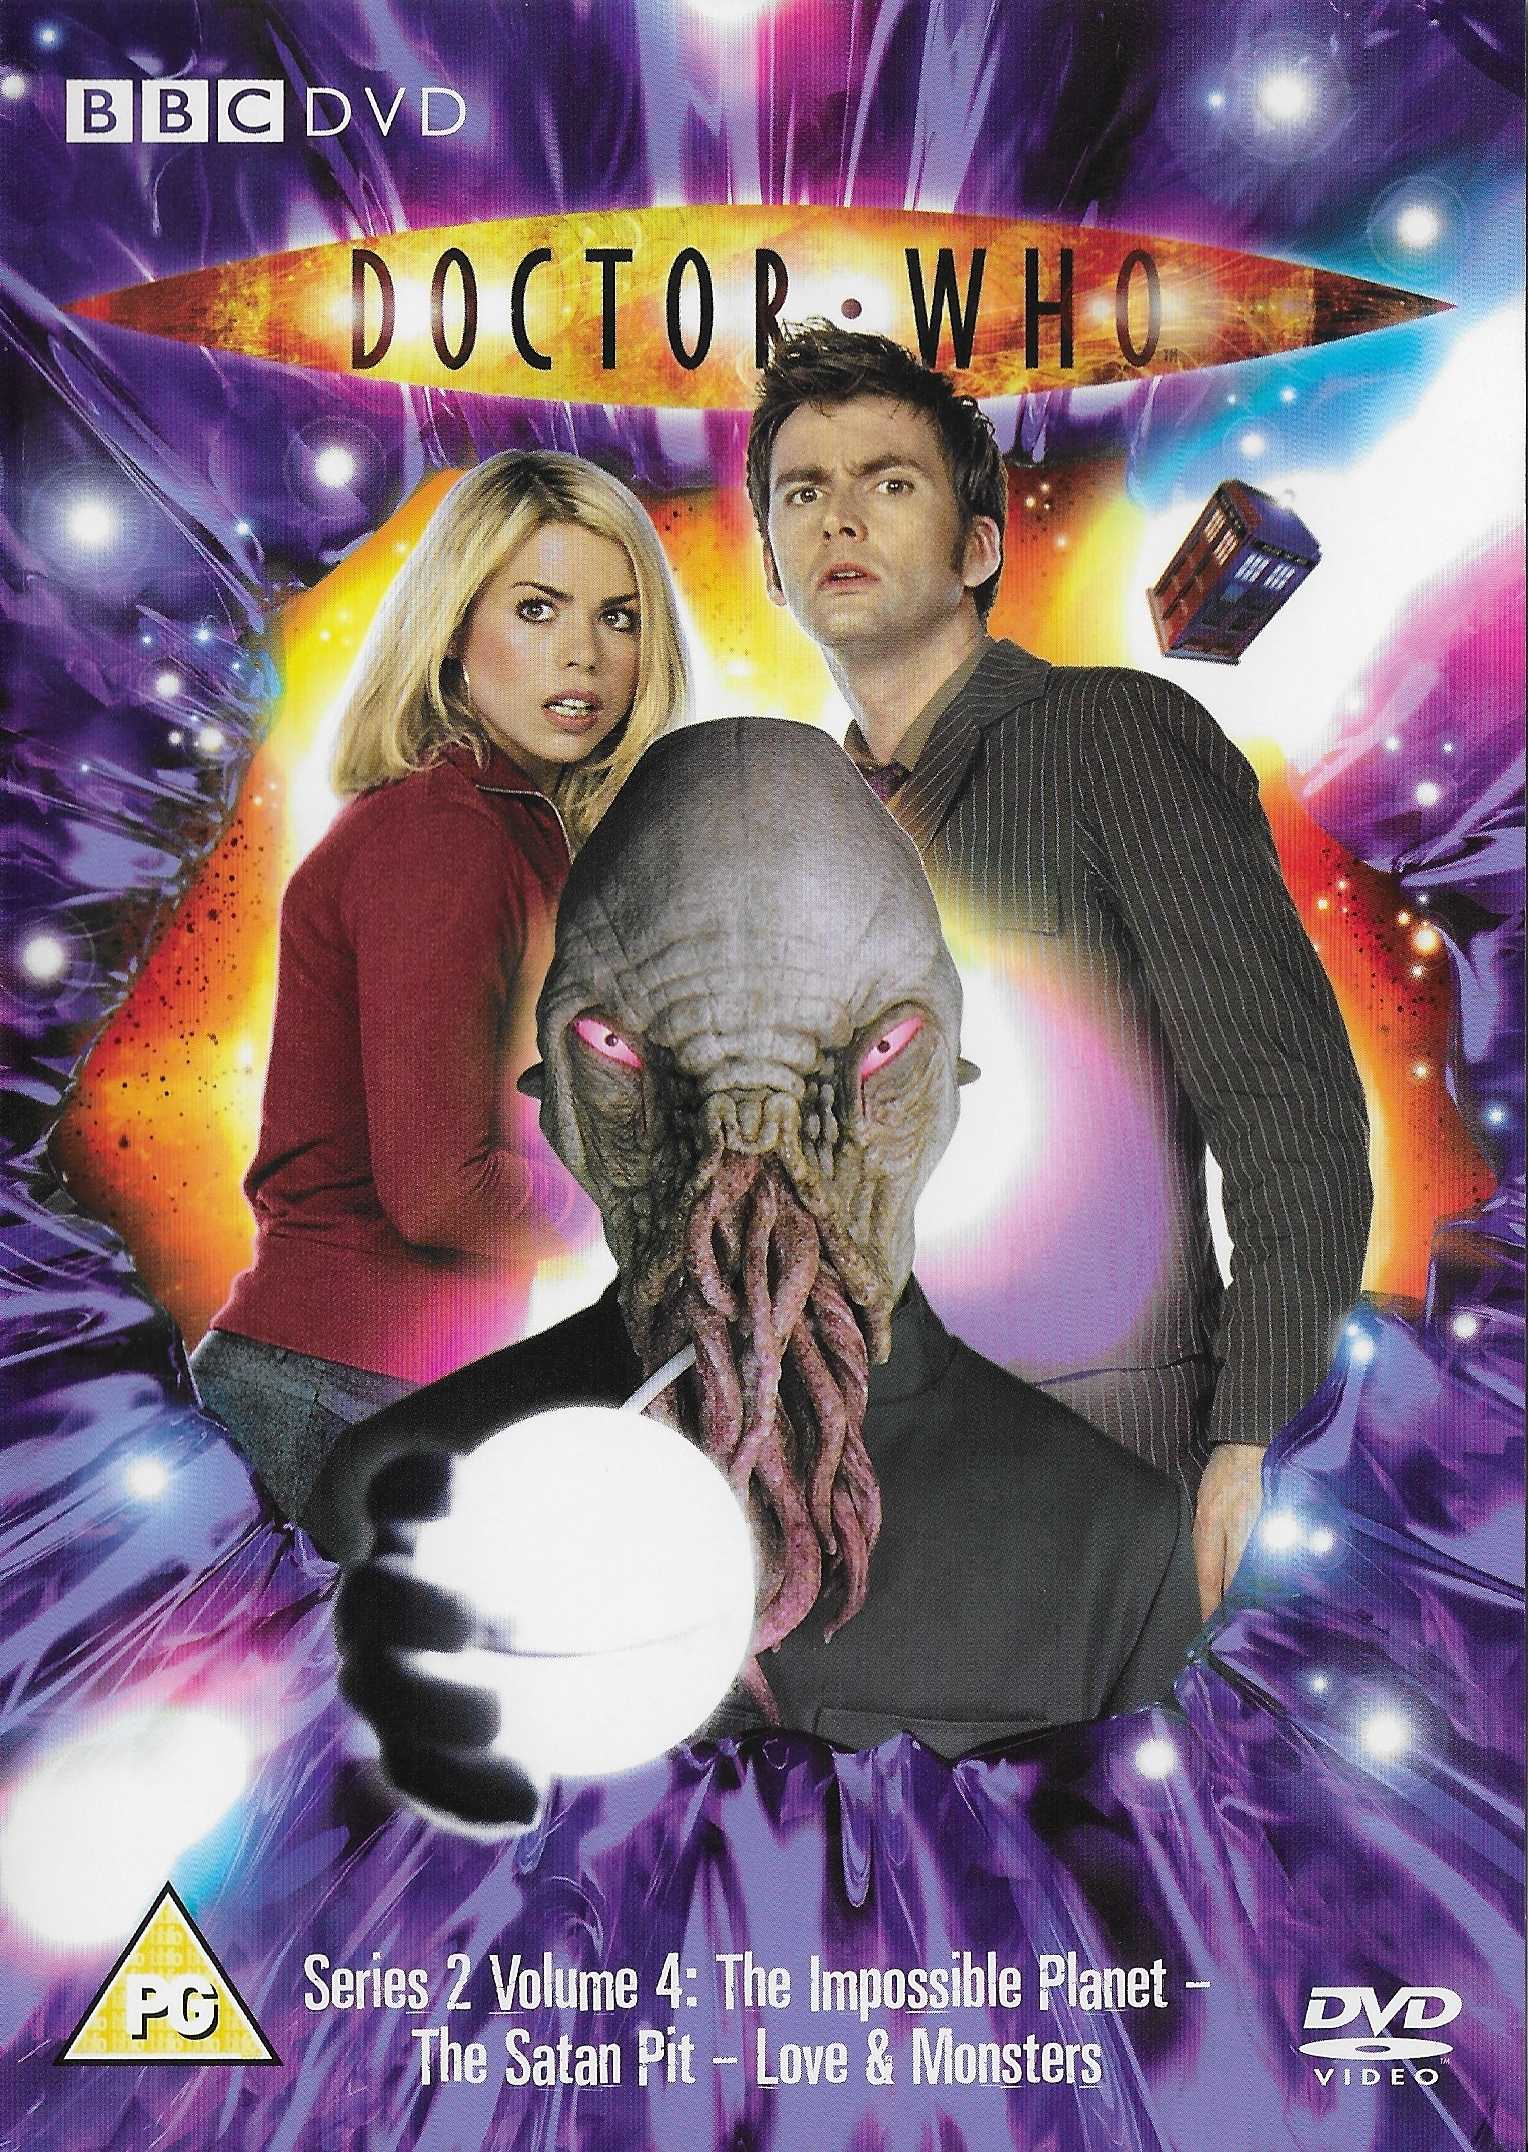 Picture of BBCDVD 1963 Doctor Who - Series 2, volume 4 by artist Matt Jones / Russell T Davies from the BBC records and Tapes library